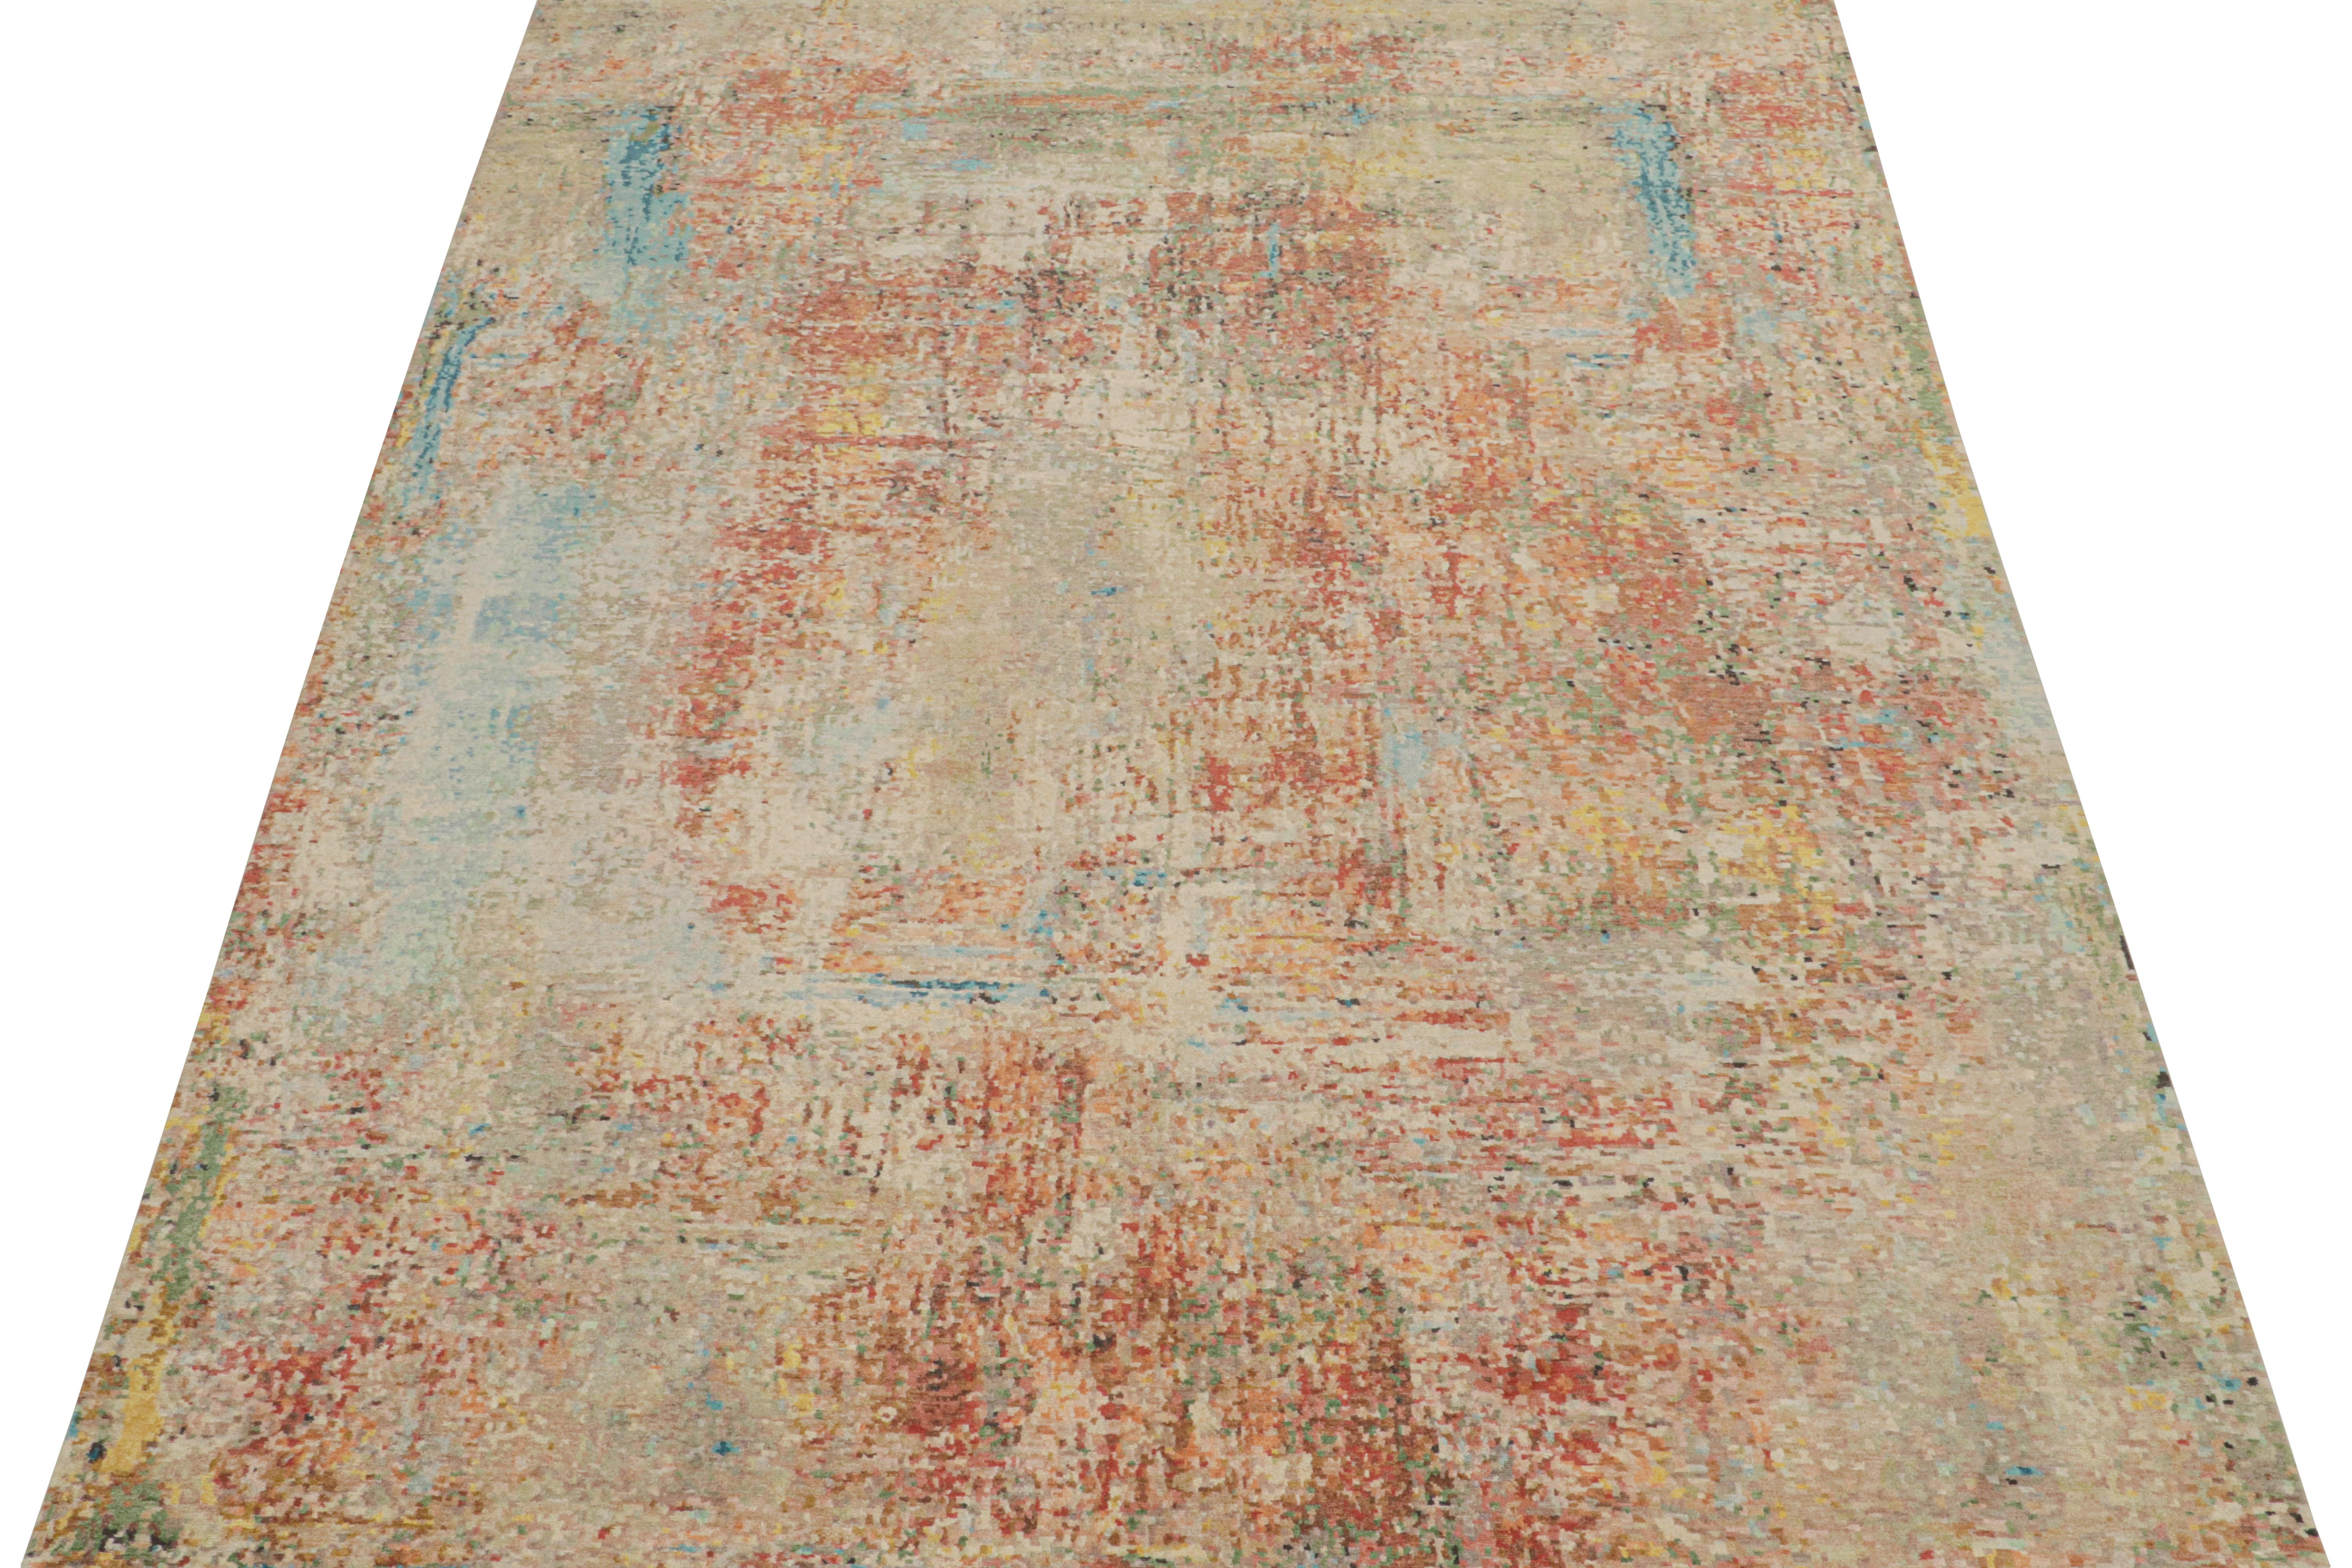 This 9x12 abstract rug is a bold new addition to Rug & Kilim’s Modern rug collection. Hand-knotted in wool and silk, its design is a take on expressionist sensibilities in the most exceptional high-end quality.

Further on the Design:

The colorway